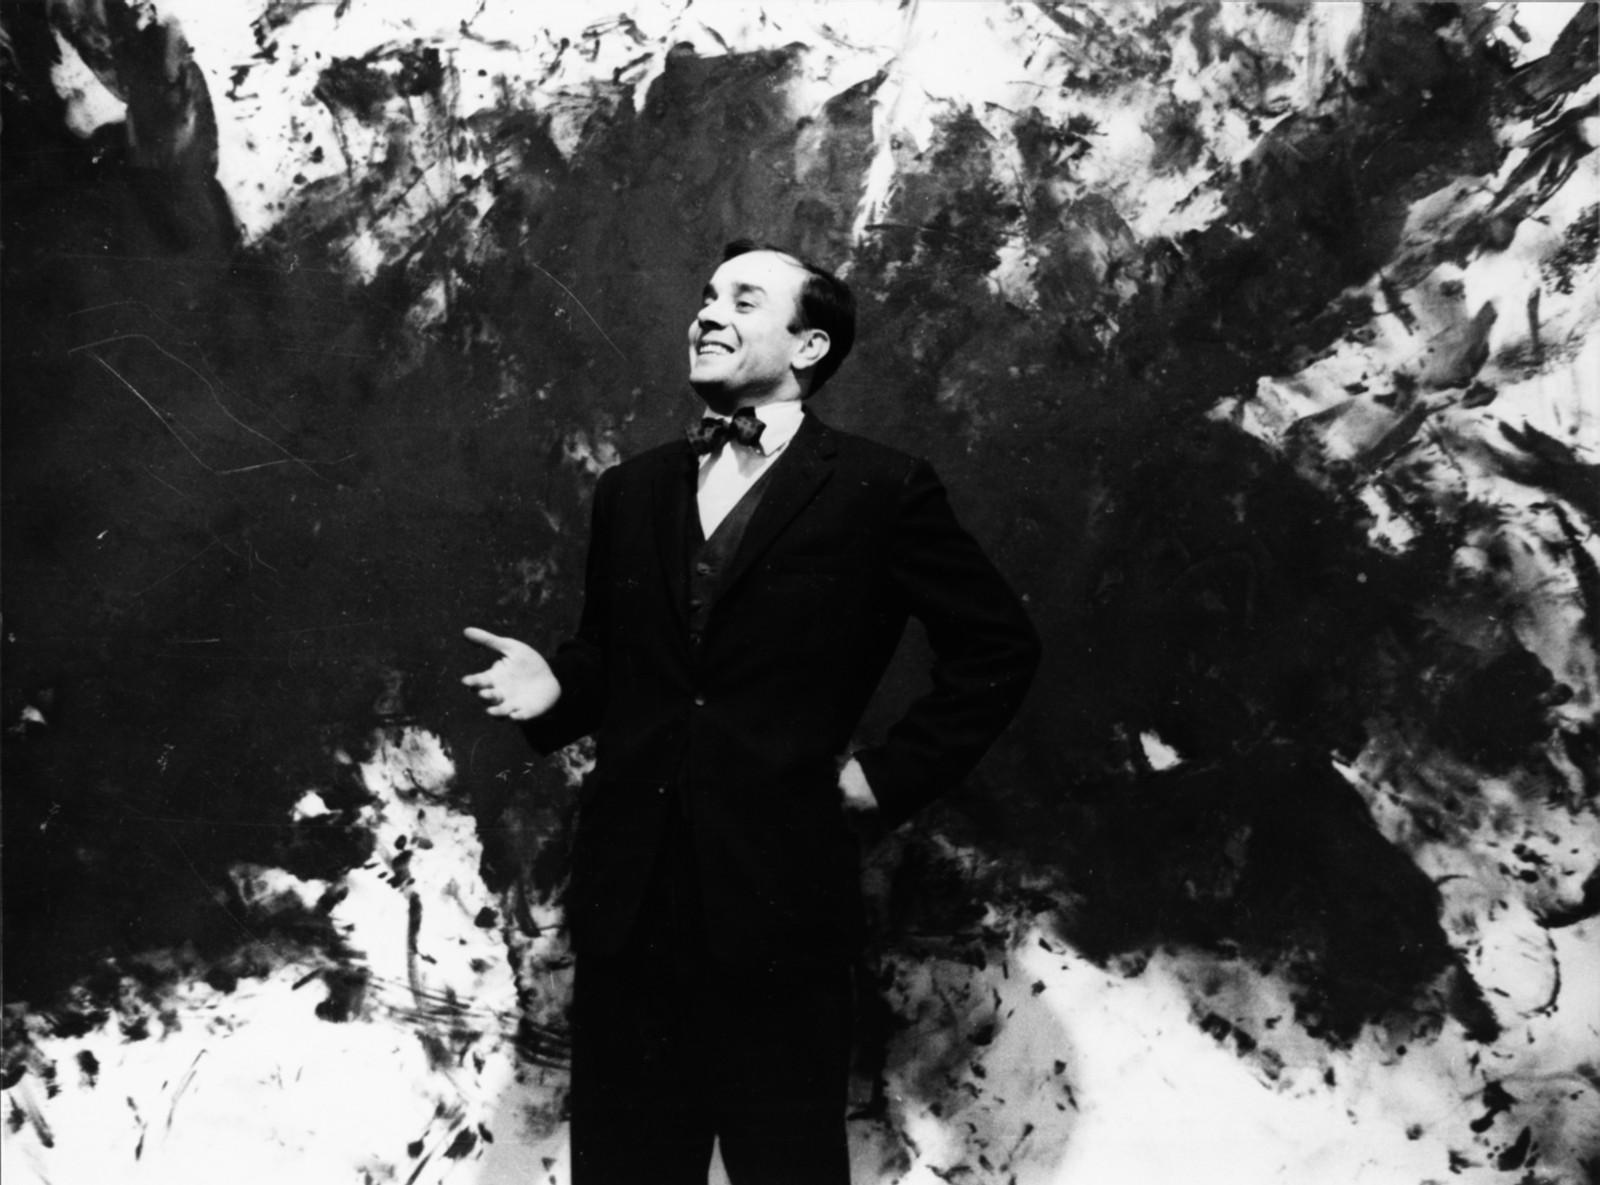 Yves Klein in front of the work "Grande Anthropophagie bleue, Hommage à Tennessee Williams" (ANT 76) at the Galerie Rive Droite